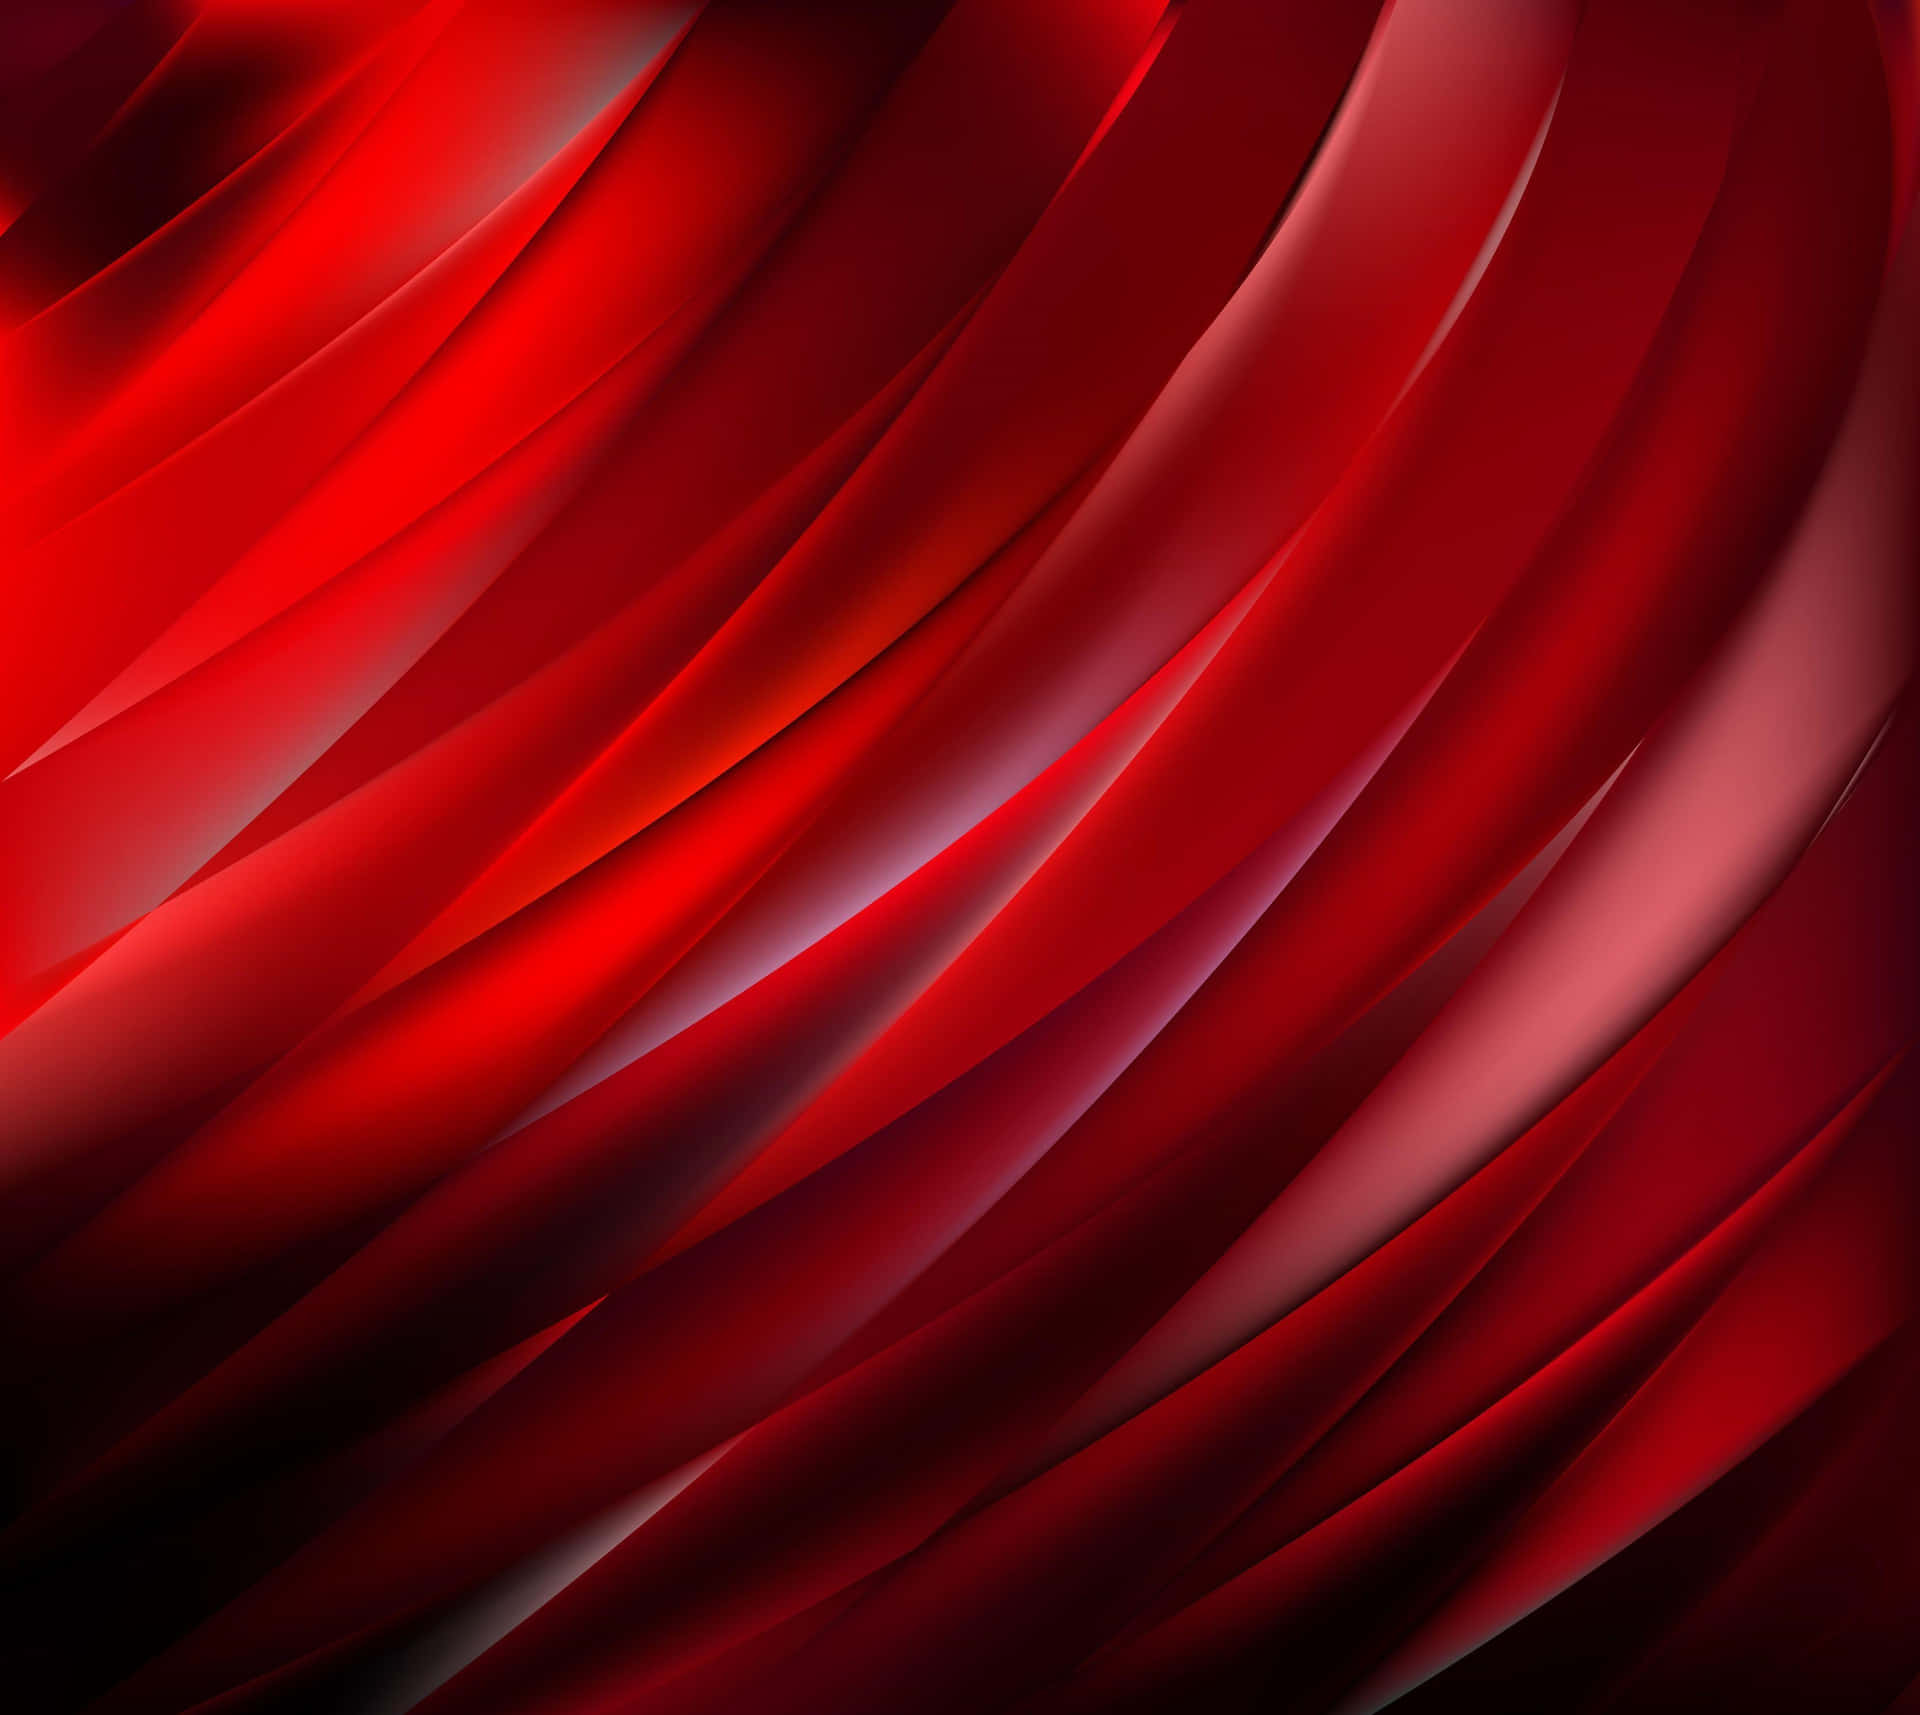 Red Abstract Background With Wavy Lines